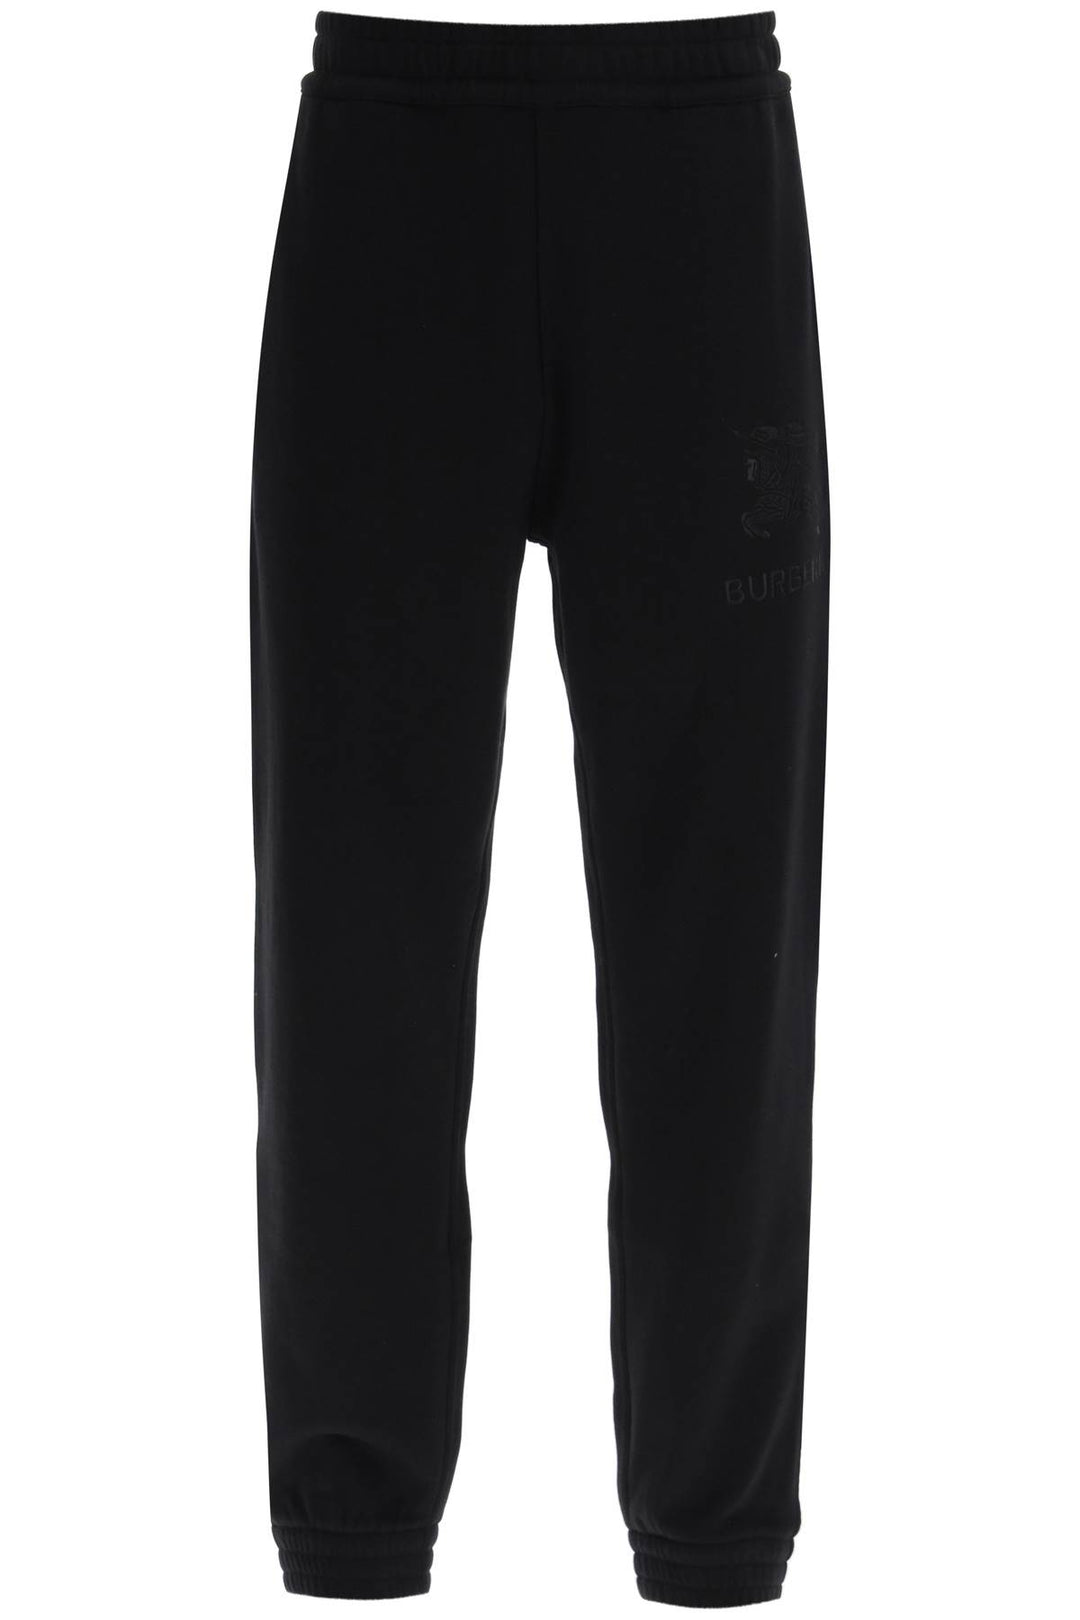 Burberry Tywall Sweatpants With Embroidered Ekd   Nero